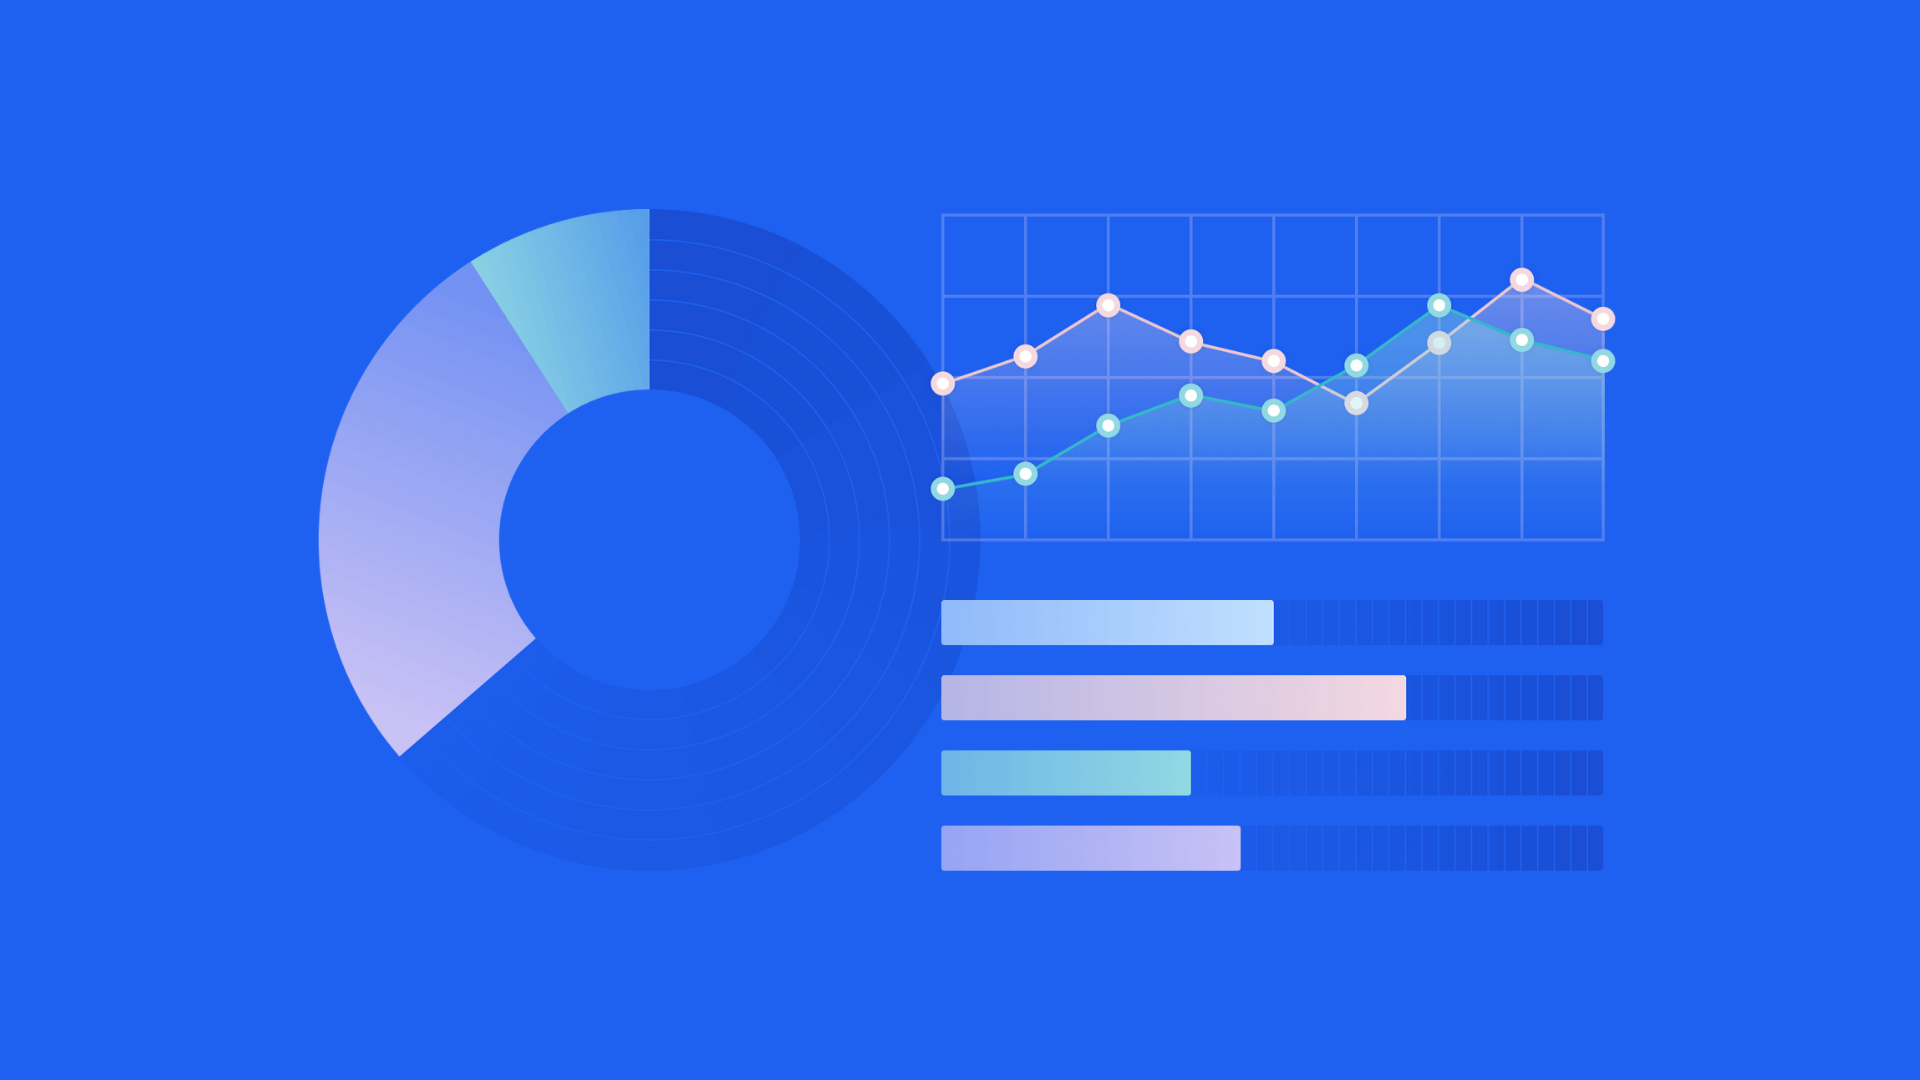 Check out how your retention metrics measure up